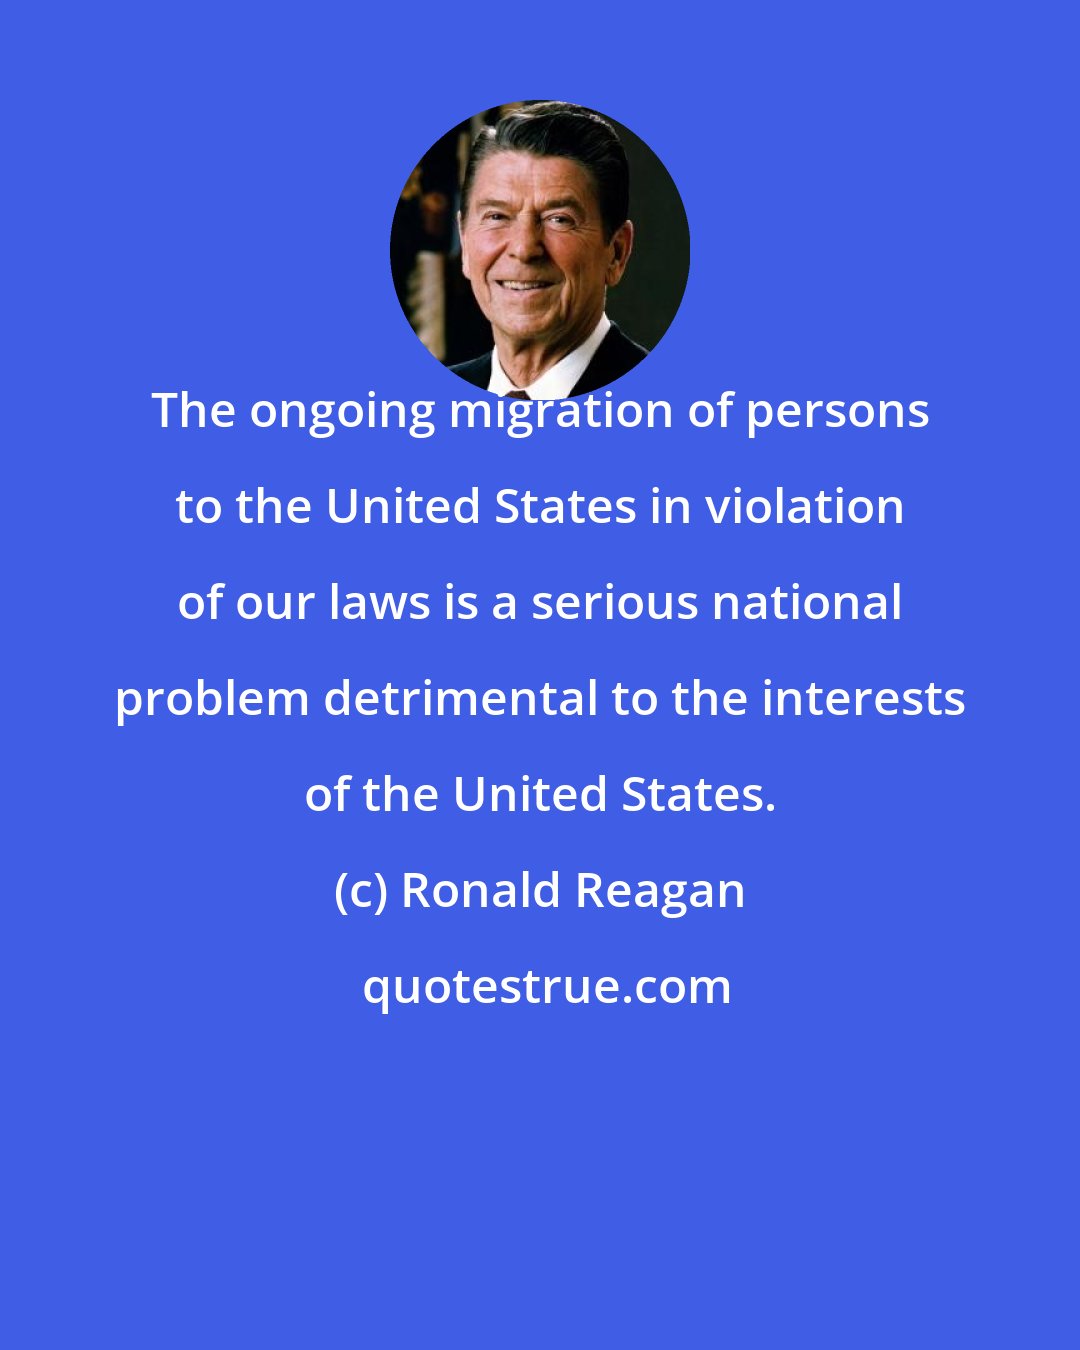 Ronald Reagan: The ongoing migration of persons to the United States in violation of our laws is a serious national problem detrimental to the interests of the United States.